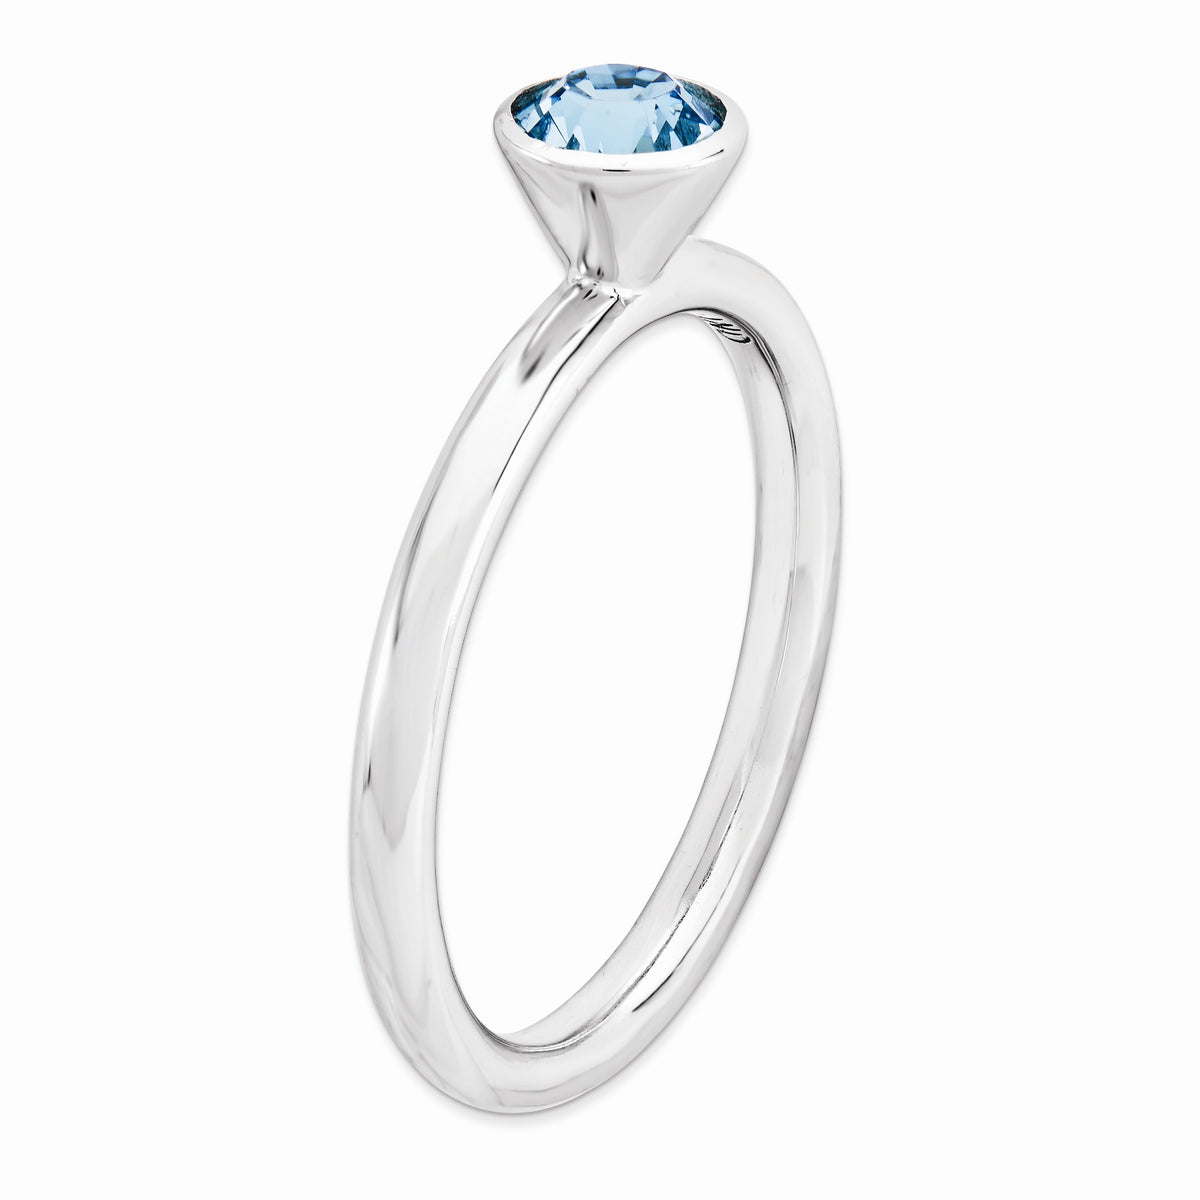 Alternate view of the 5mm Faceted Light Blue Crystal Sterling Silver Stackable Ring by The Black Bow Jewelry Co.